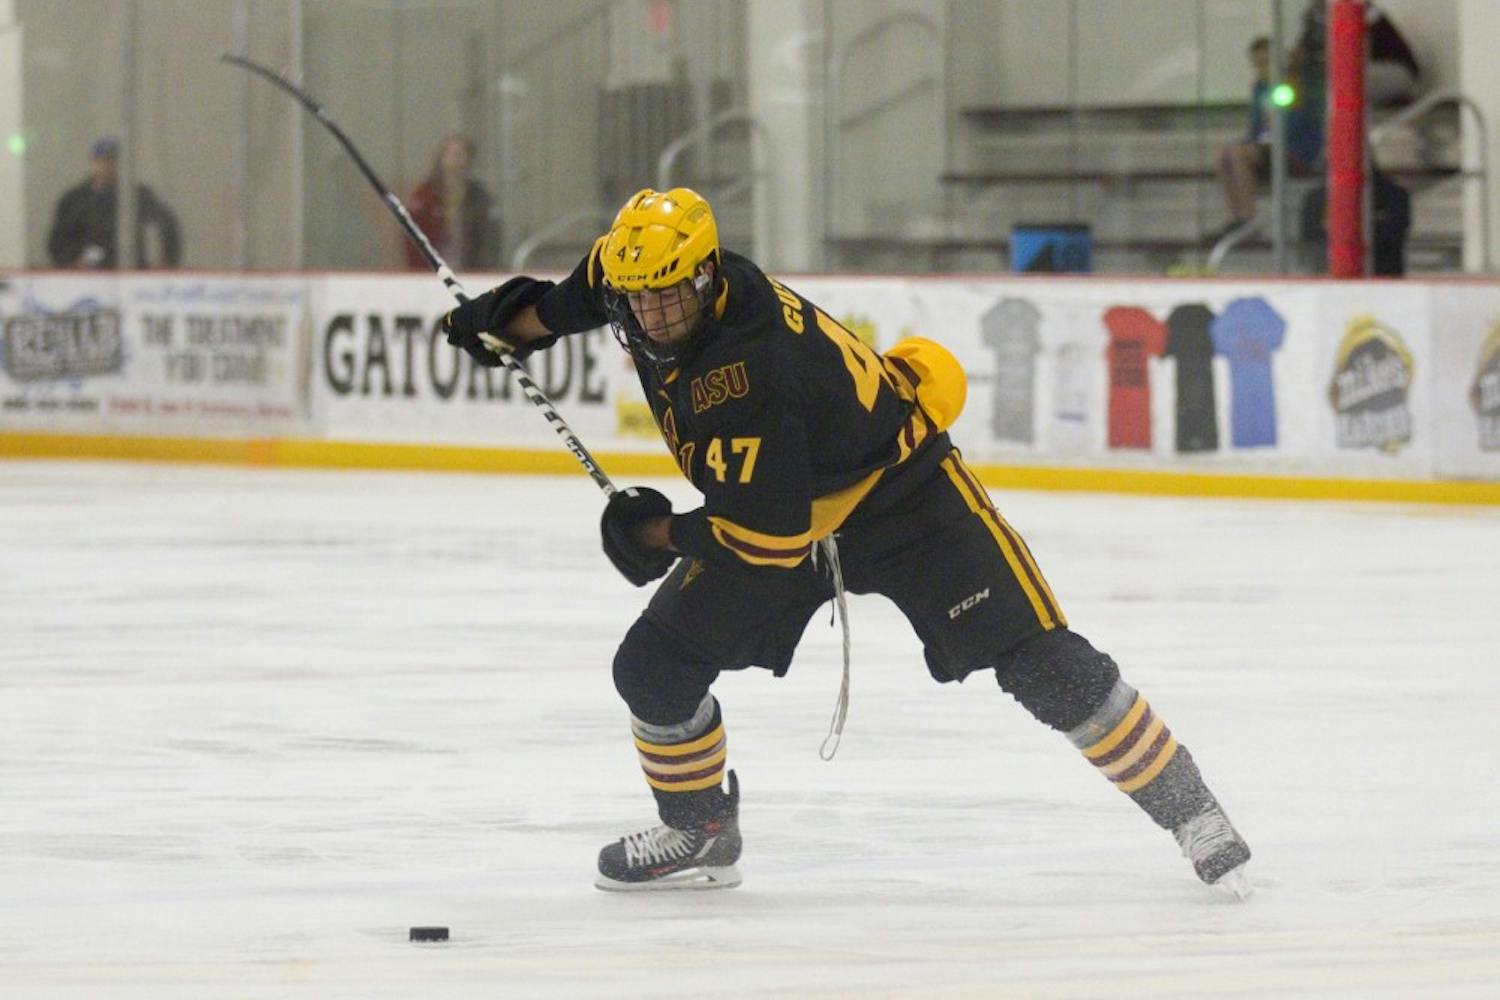 ASU sophomore right defender Nicholas Gushue (47, gold) looks to rip a shot during the annual Maroon and Gold Scrimmage at Oceanside Ice Arena, in Tempe, Arizona on Saturday, Oct. 1, 2016. The maroon team won 4-3 in overtime.